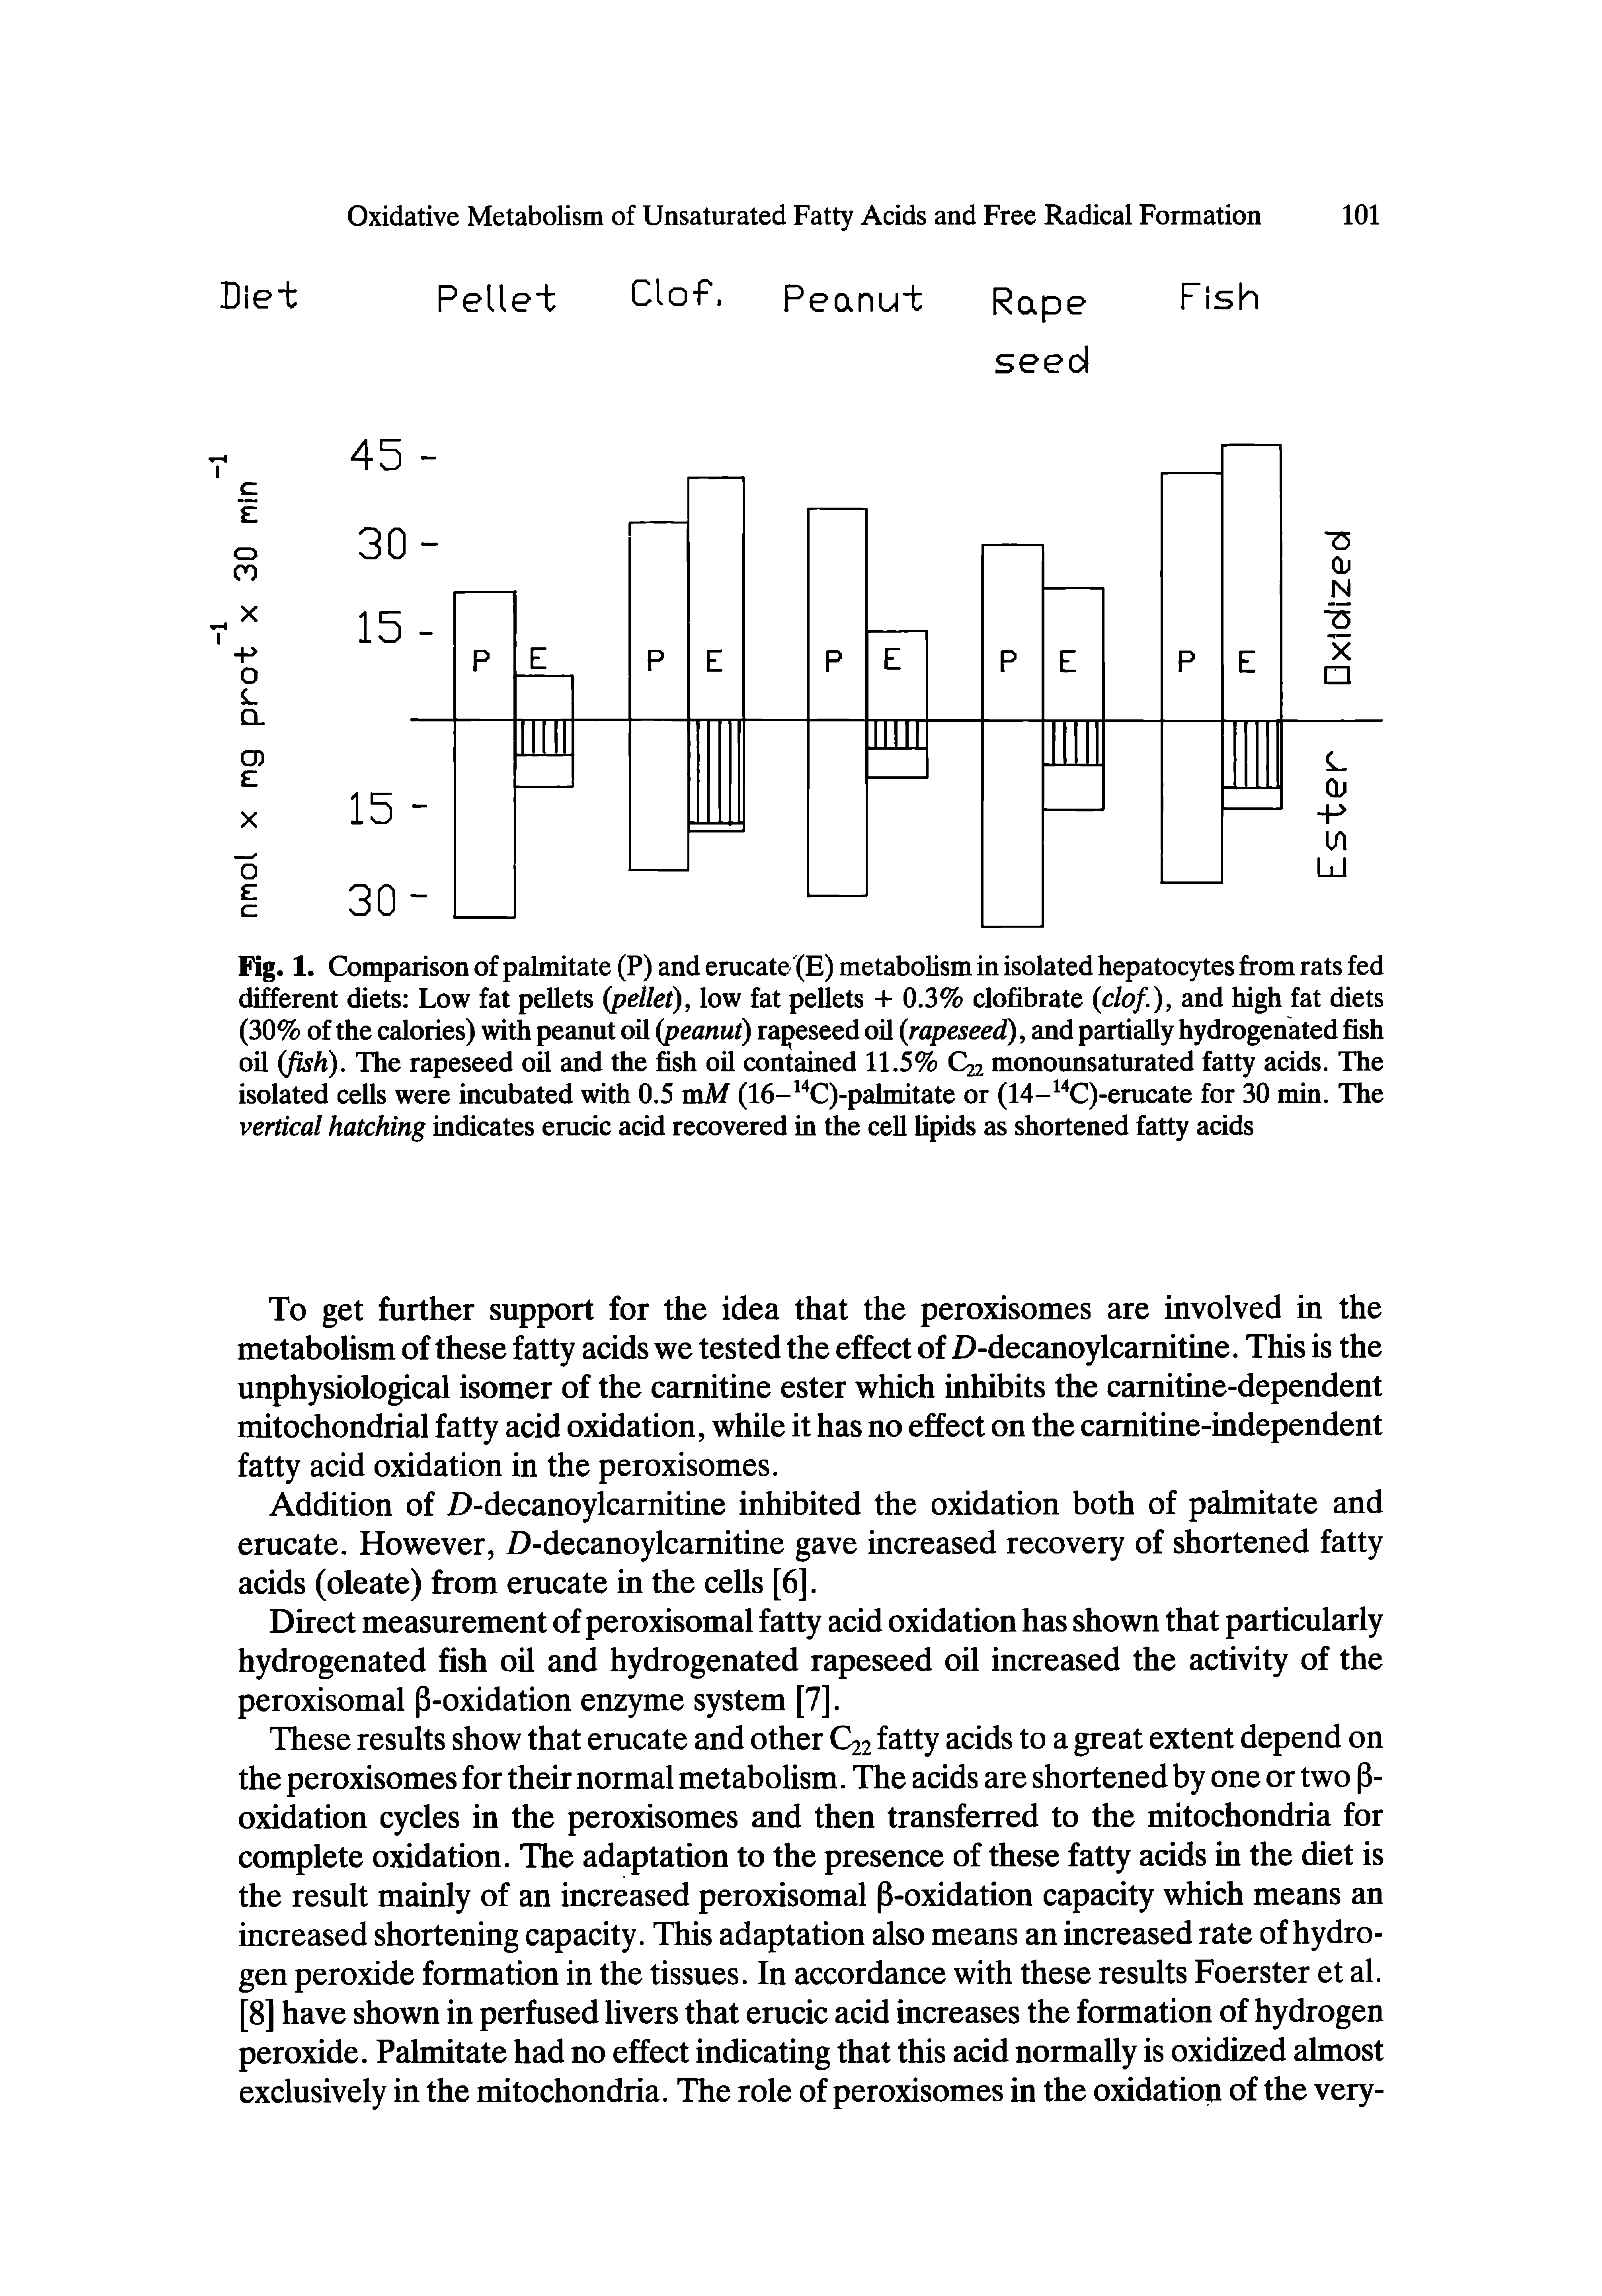 Fig. 1. Comparison of palmitate (P) and erucate (E) metabolism in isolated hepatocytes from rats fed different diets Low fat pellets (pellet), low fat pellets + 0.3% clofibrate (clof.), and high fat diets (30% of the calories) with peanut oil (peanut) ra eseed oil (rapeseed), and partially hydrogenated fish oil (fish). The rapeseed oil and the fish oil contained 11.5% C22 monounsaturated fatty acids. The isolated cells were incubated with 0.5 mAf (16- C)-palmitate or (14- C)-erucate for 30 min. The vertical hatching indicates erucic acid recovered in the cell lipids as shortened fatty acids...